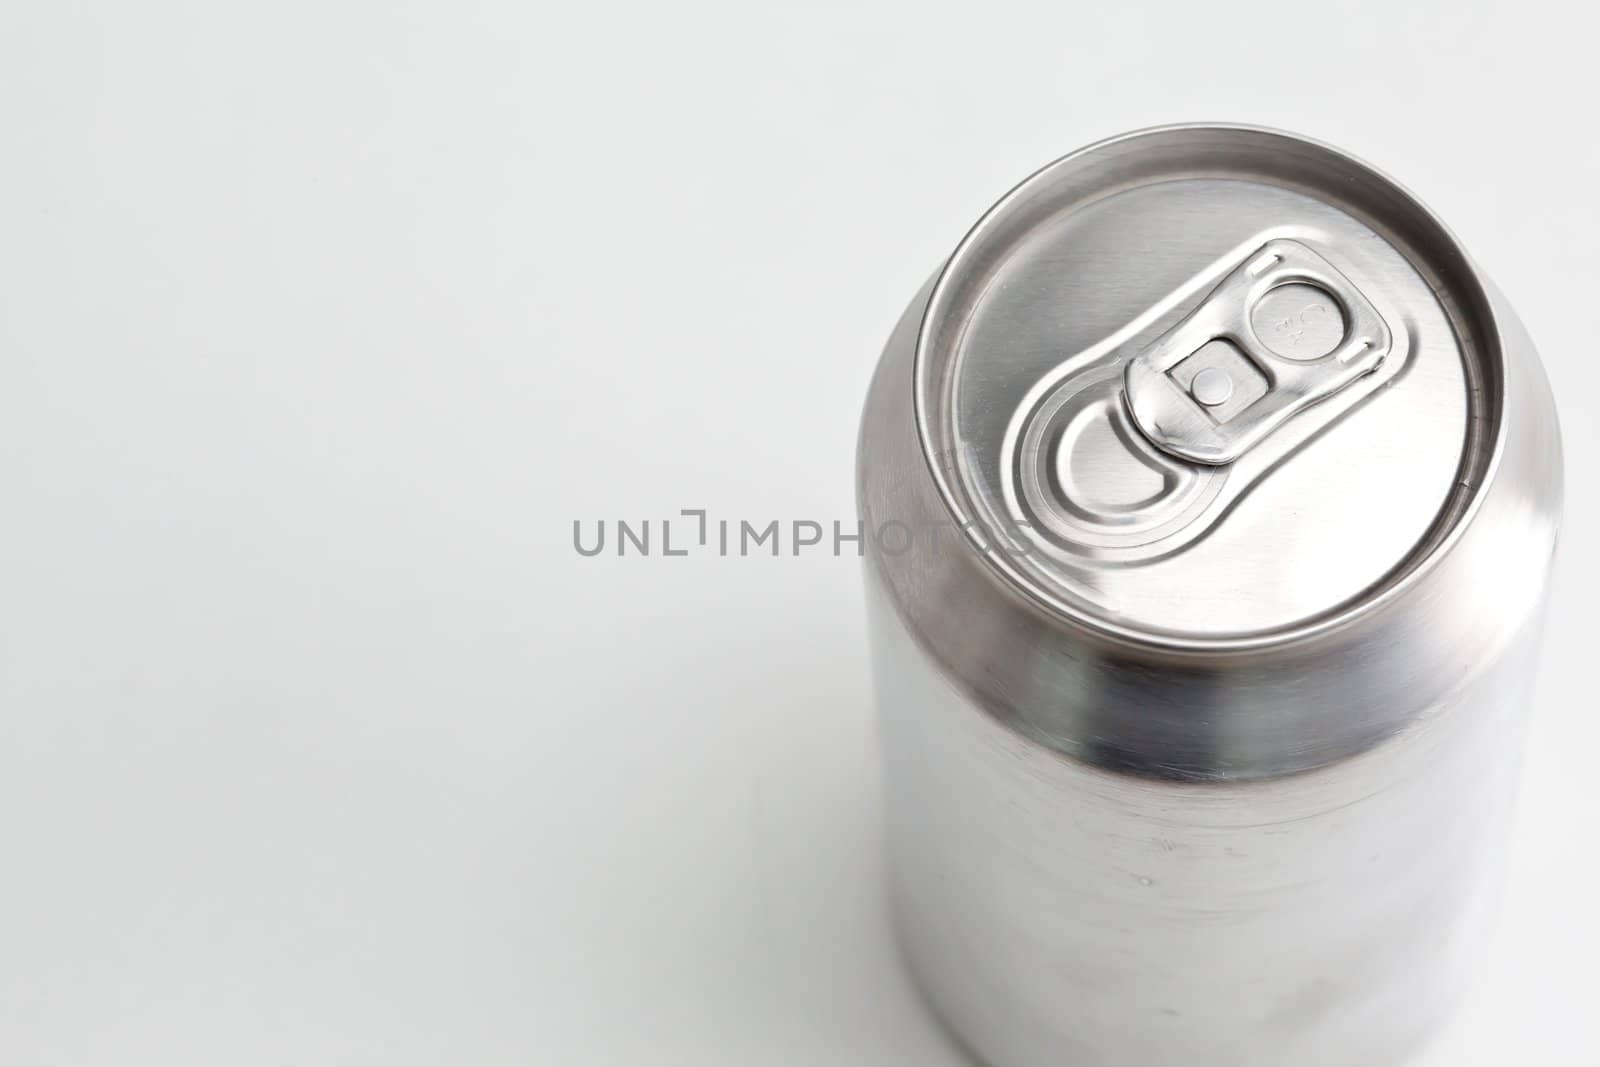 Overhead view of a closed aluminium can by Wavebreakmedia